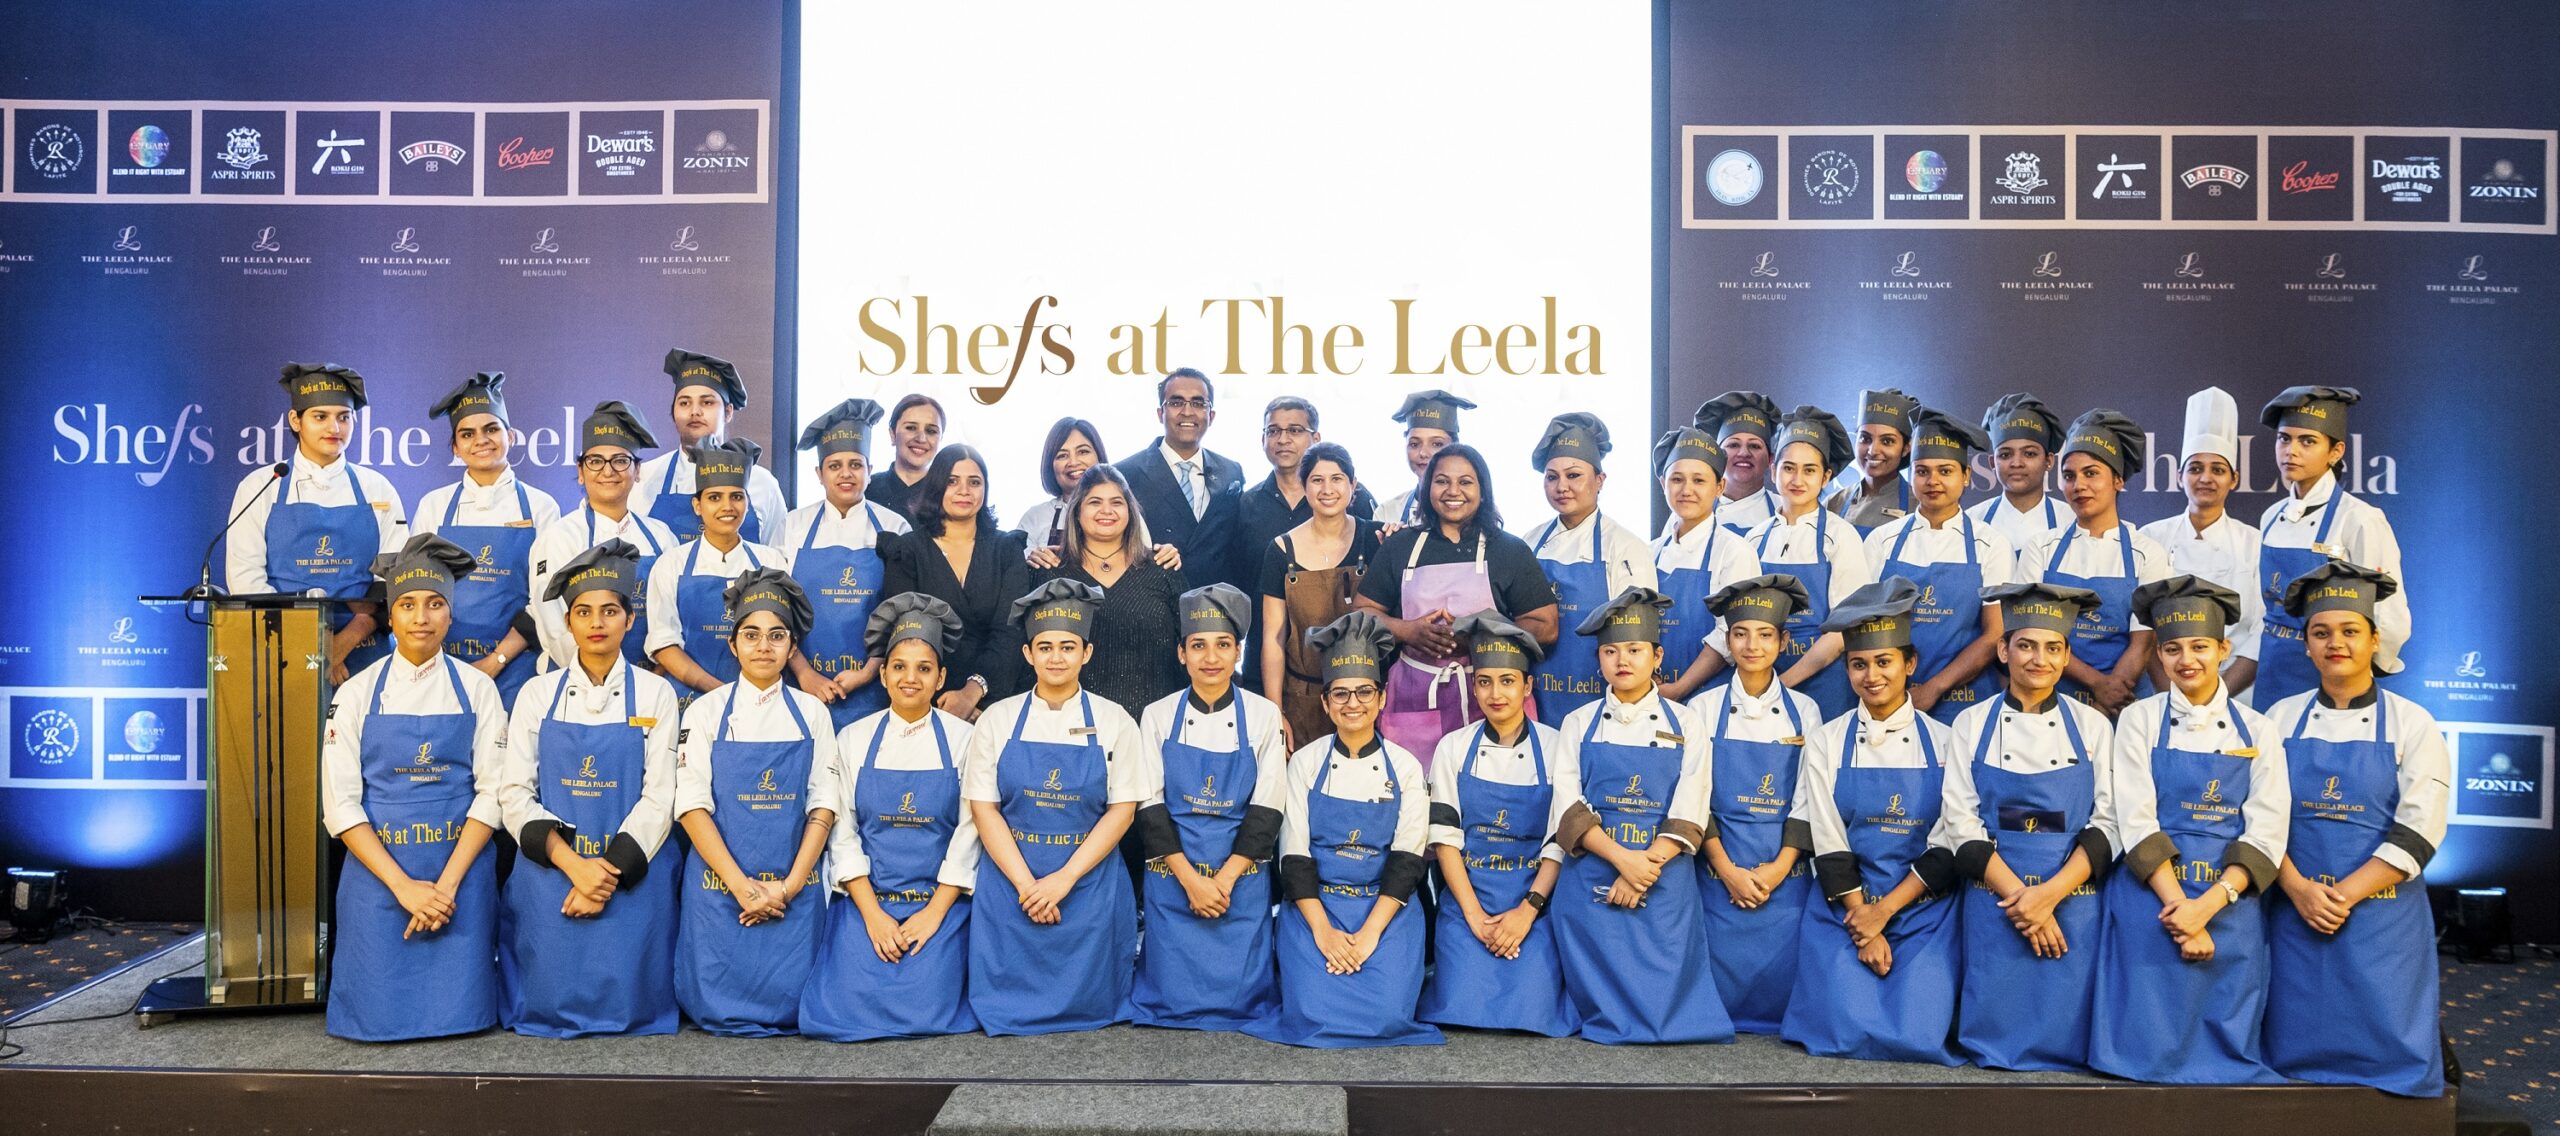 The Leela Palaces, Hotels and Resorts launches a month-long campaign to celebrate the empowerment of women